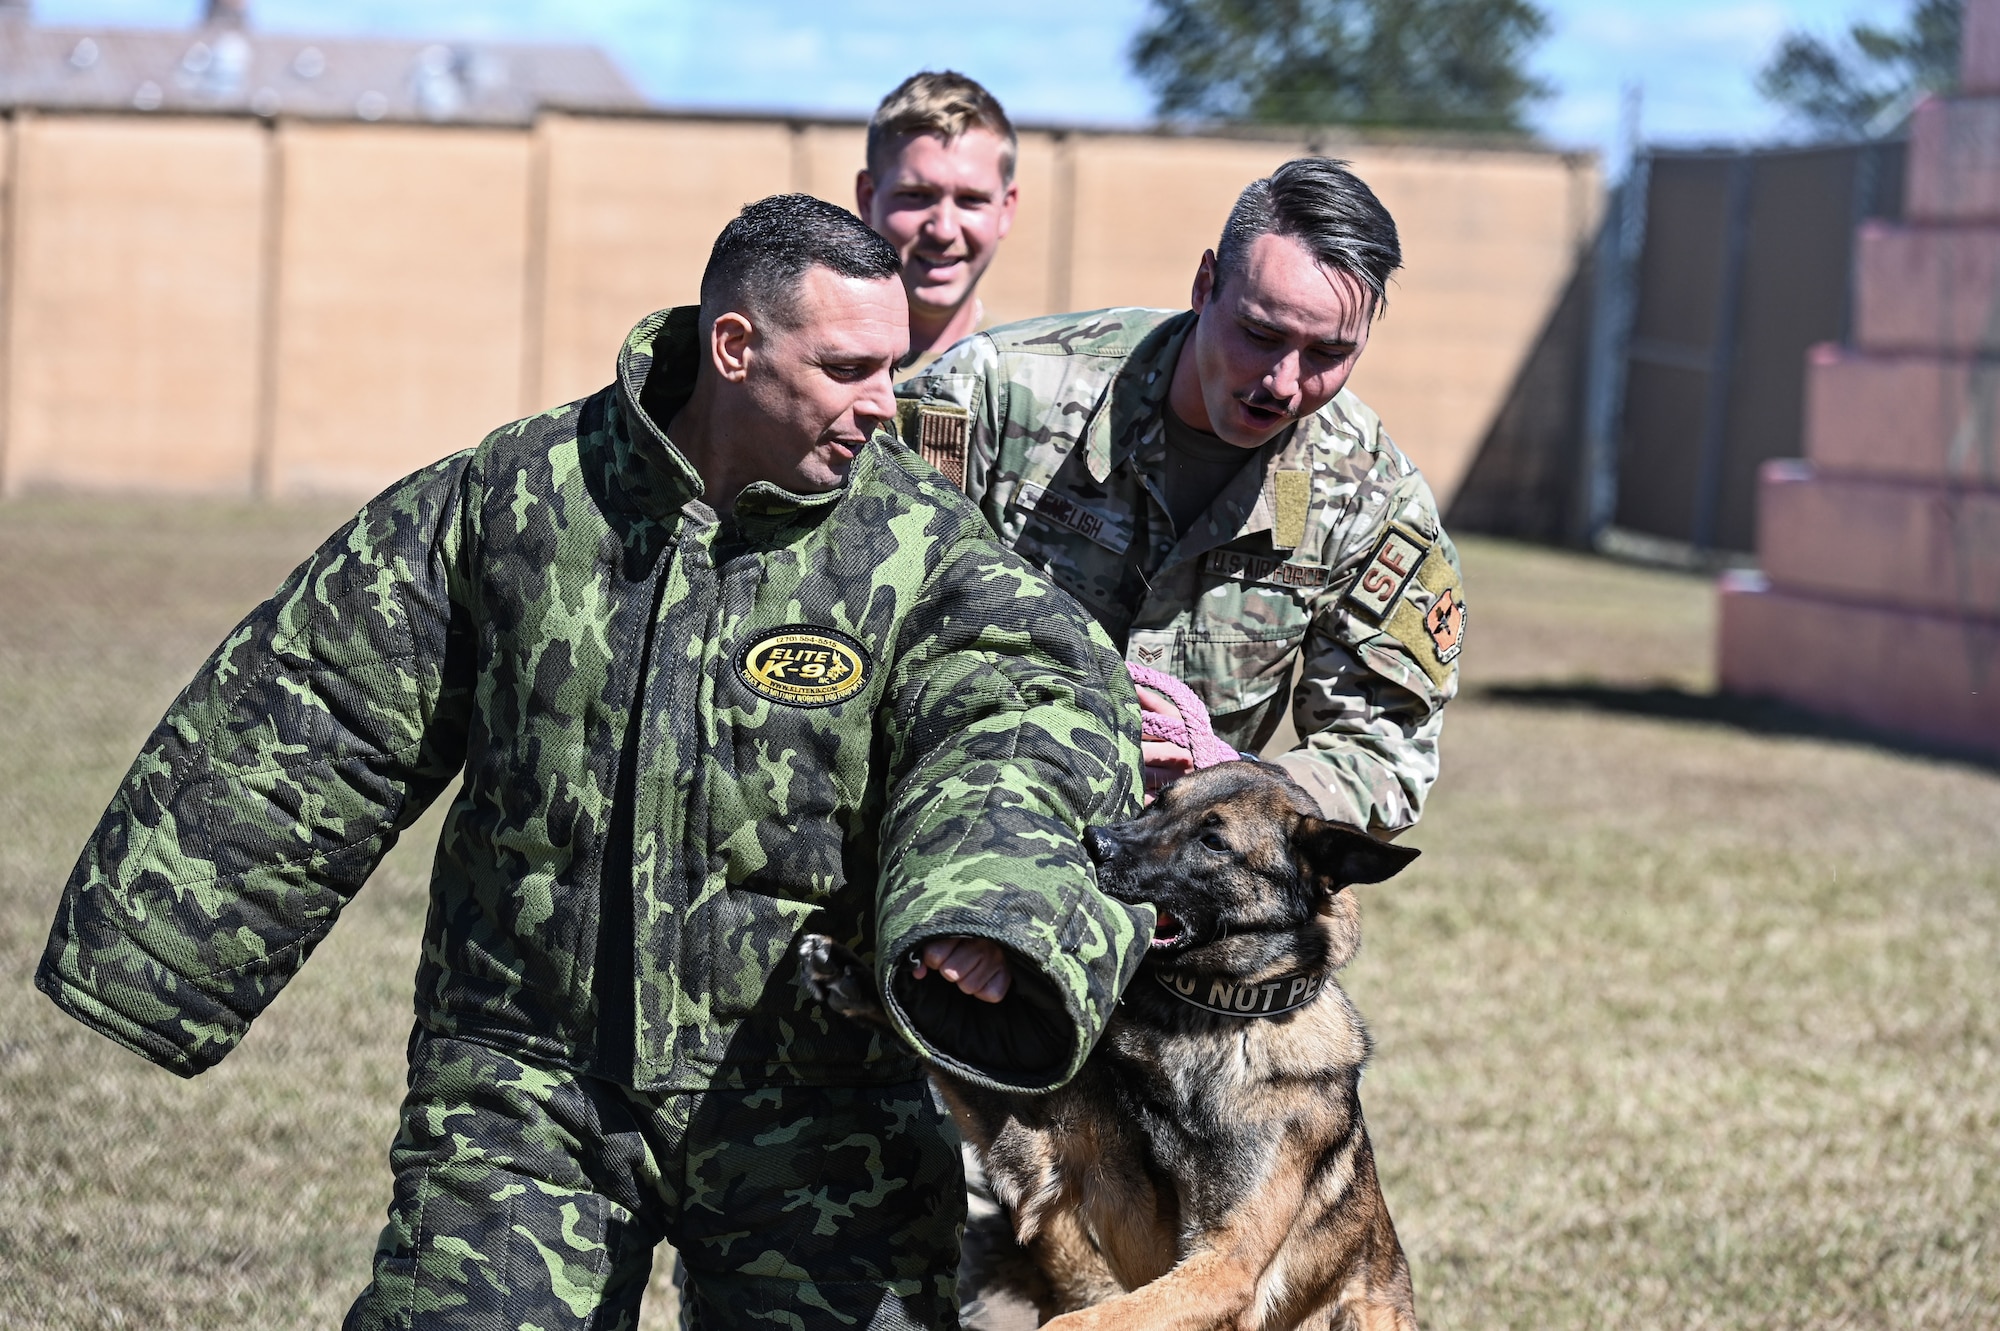 U.S. Air Force Col. Pedro Matos, 14th Mission Support Group commander runs from K-9 Dalton while handlers SrA Colin English and SSgt Devon Reynolds position themselves to be ready to assist at Columbus Air Force Base, MS, Oct. 16, 2023. Matos was still able to feel the strength of the bite through the safety suit. (U.S. Air Force photo by A1C Jessica Blocher)